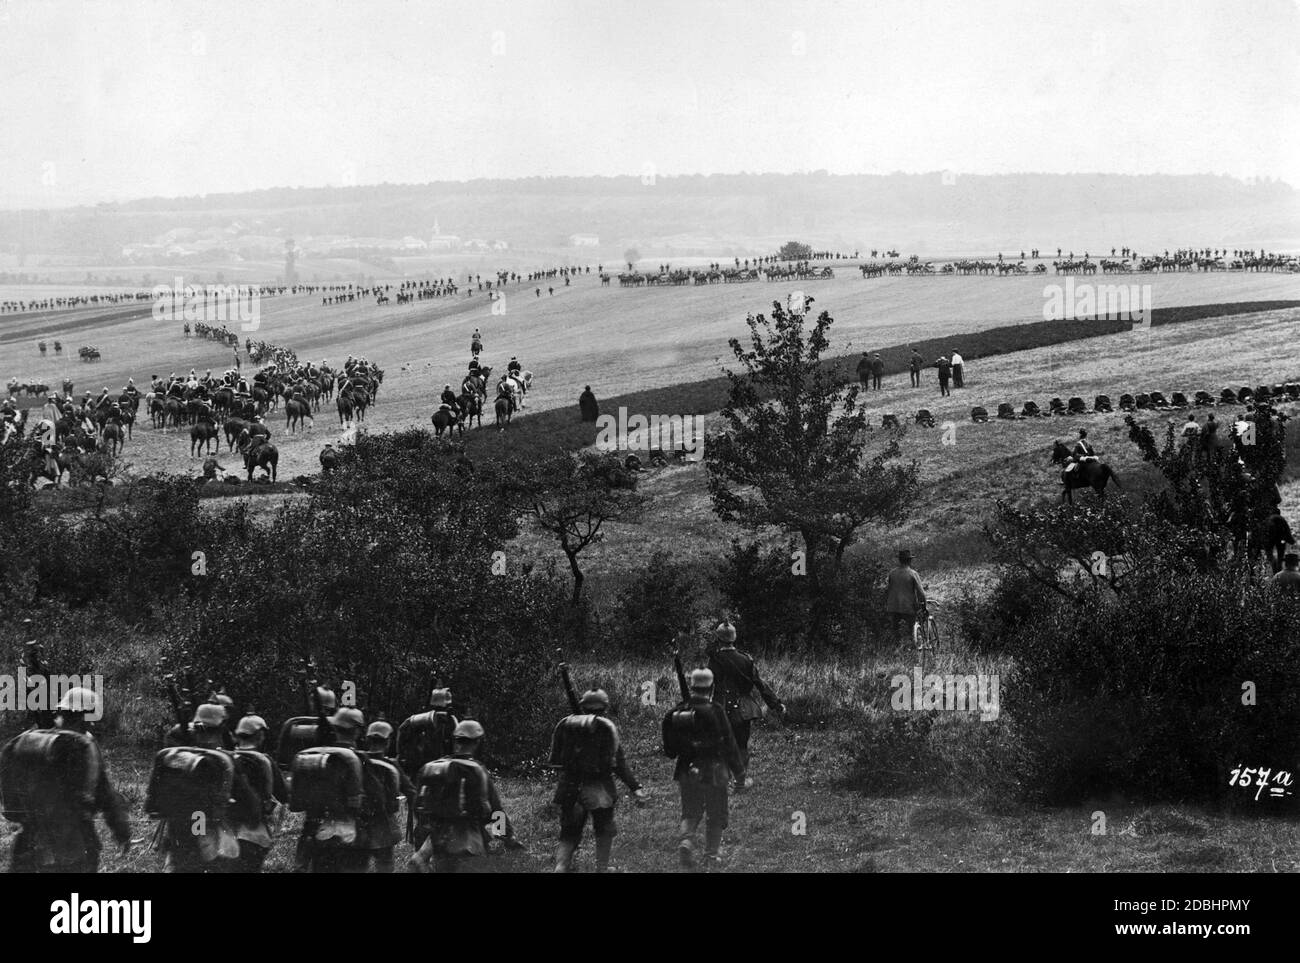 The last imperial manoeuvre in German history in September 1913. The cavalry group is on the left, in the middle of the picture is Emperor Wilhelm II, who follows the battle with his retinue. Stock Photo